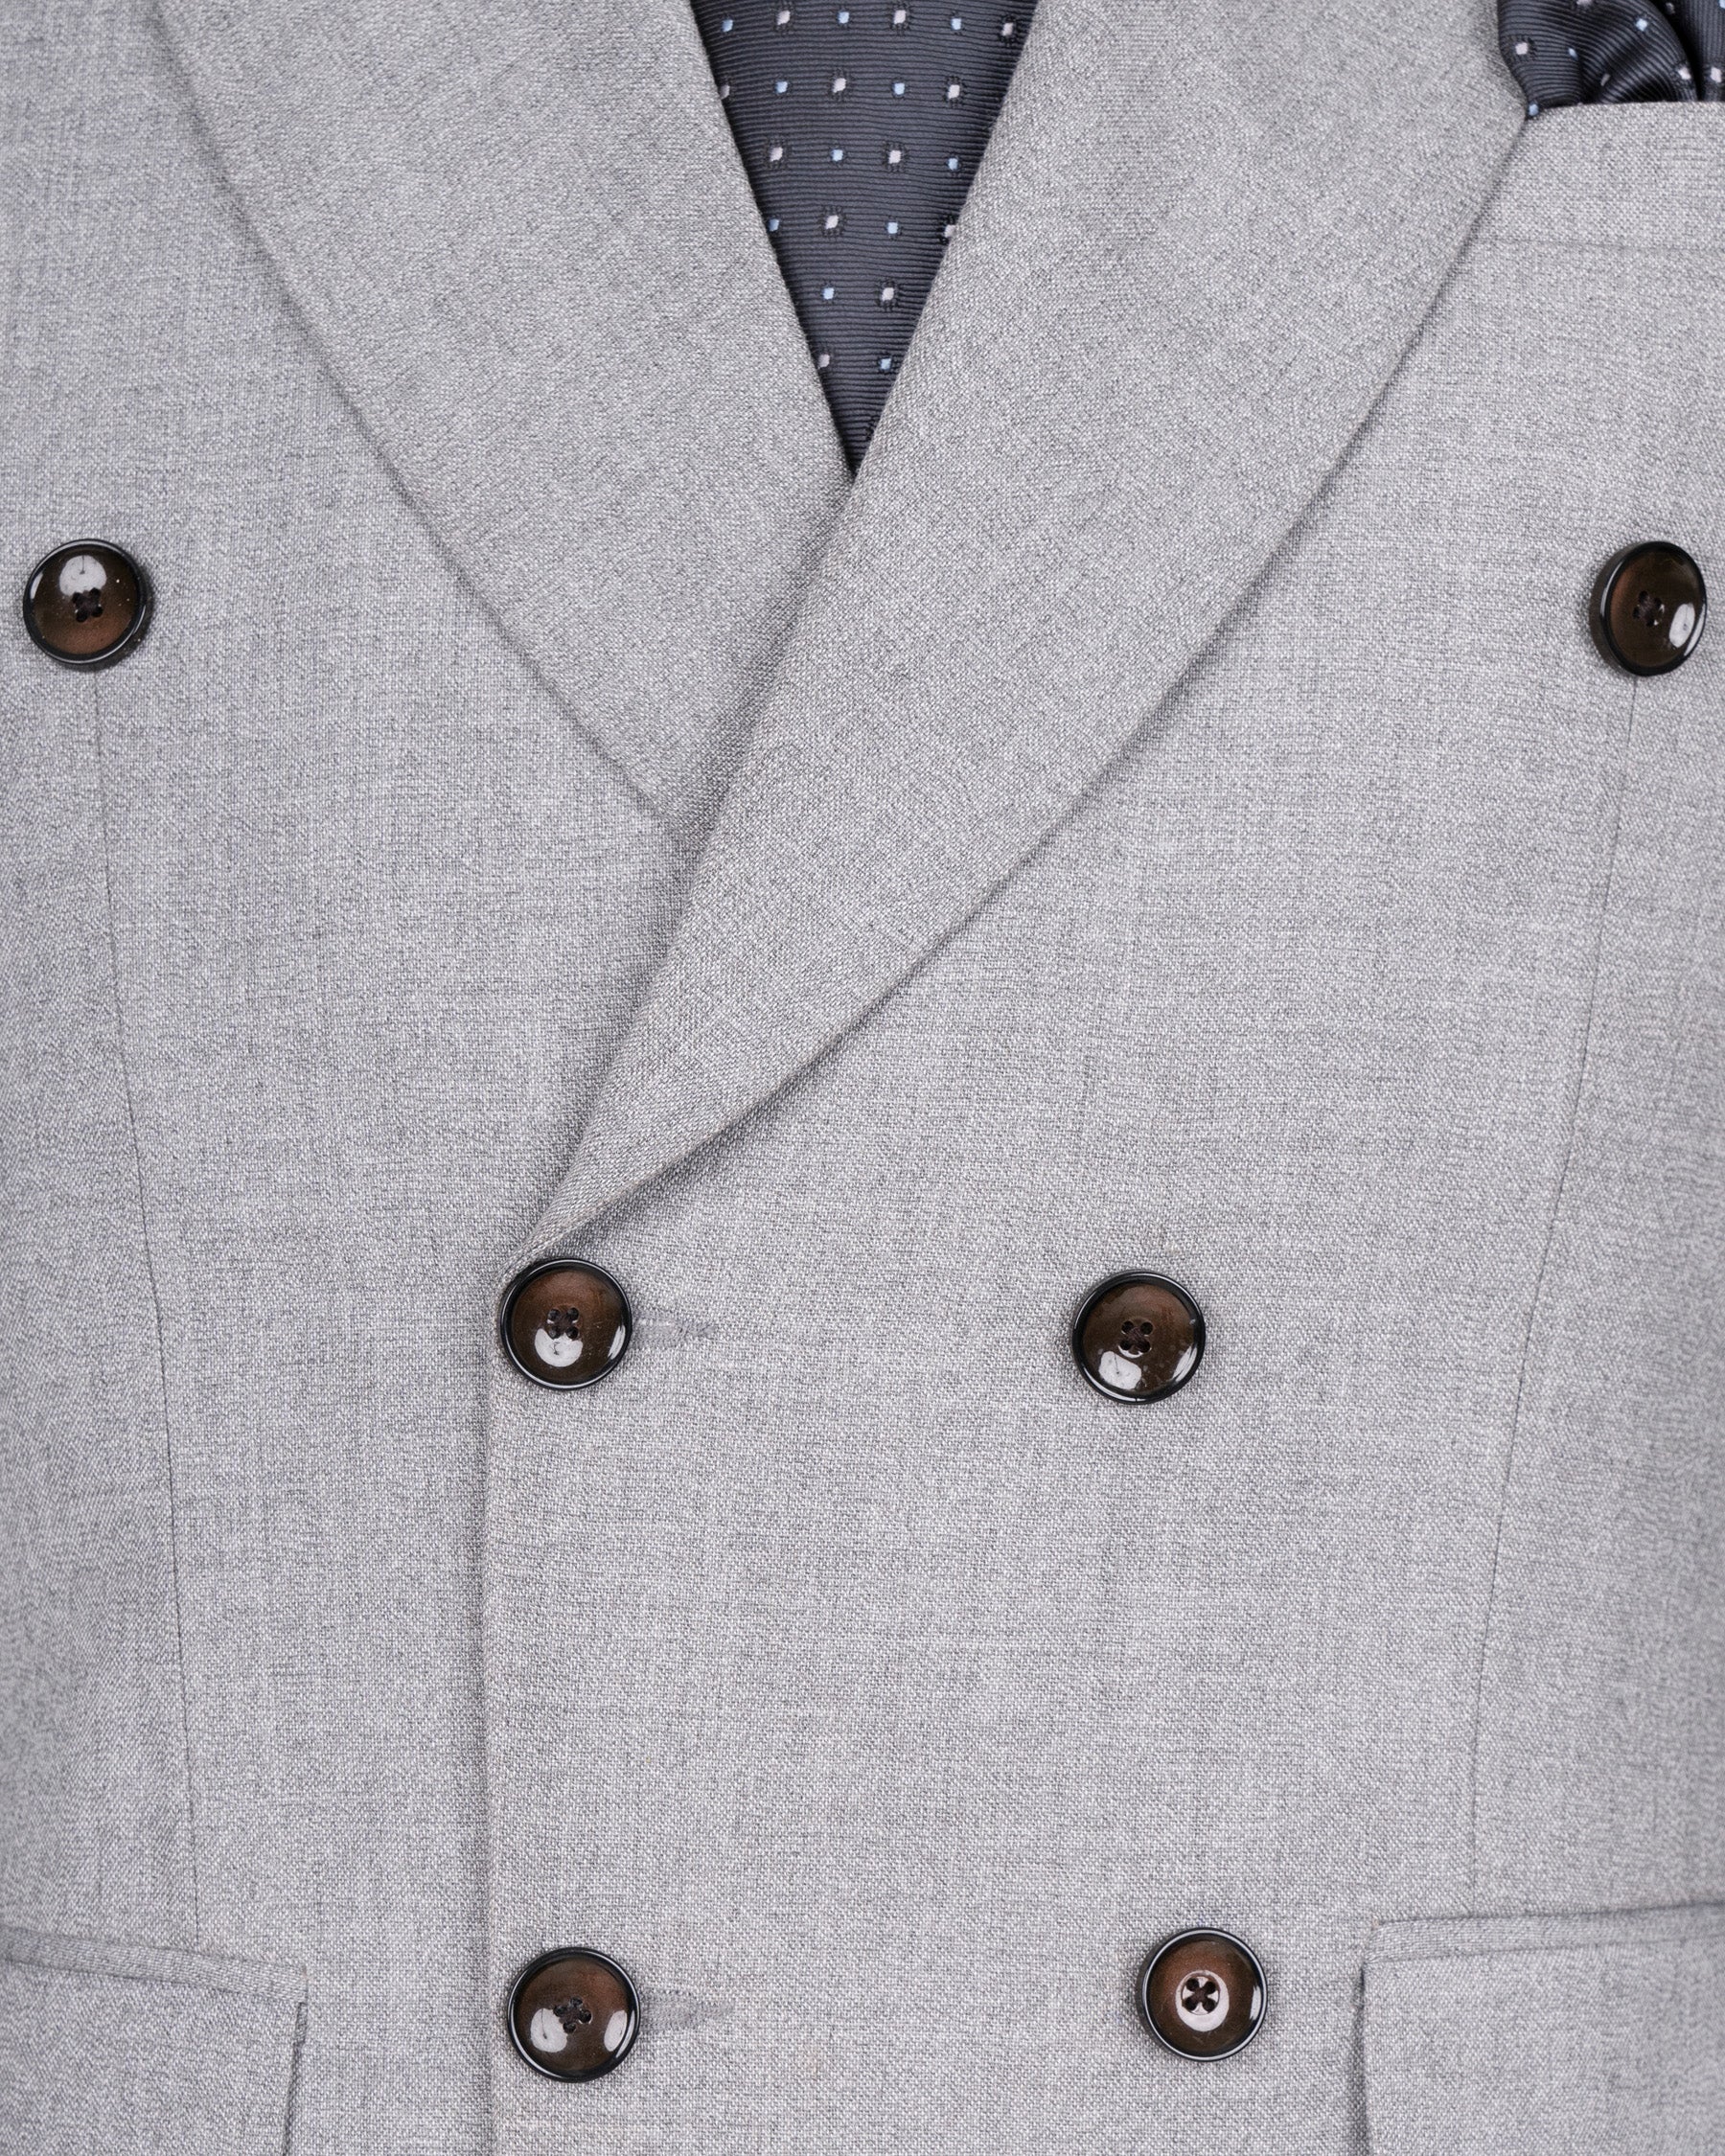 Silver Sand Grey Double-BreaBled Wool Rich Blazer BL1529-DB-36, BL1529-DB-38, BL1529-DB-40, BL1529-DB-42, BL1529-DB-44, BL1529-DB-46, BL1529-DB-48, BL1529-DB-50, BL1529-DB-52, BL1529-DB-54, BL1529-DB-56, BL1529-DB-58, BL1529-DB-60